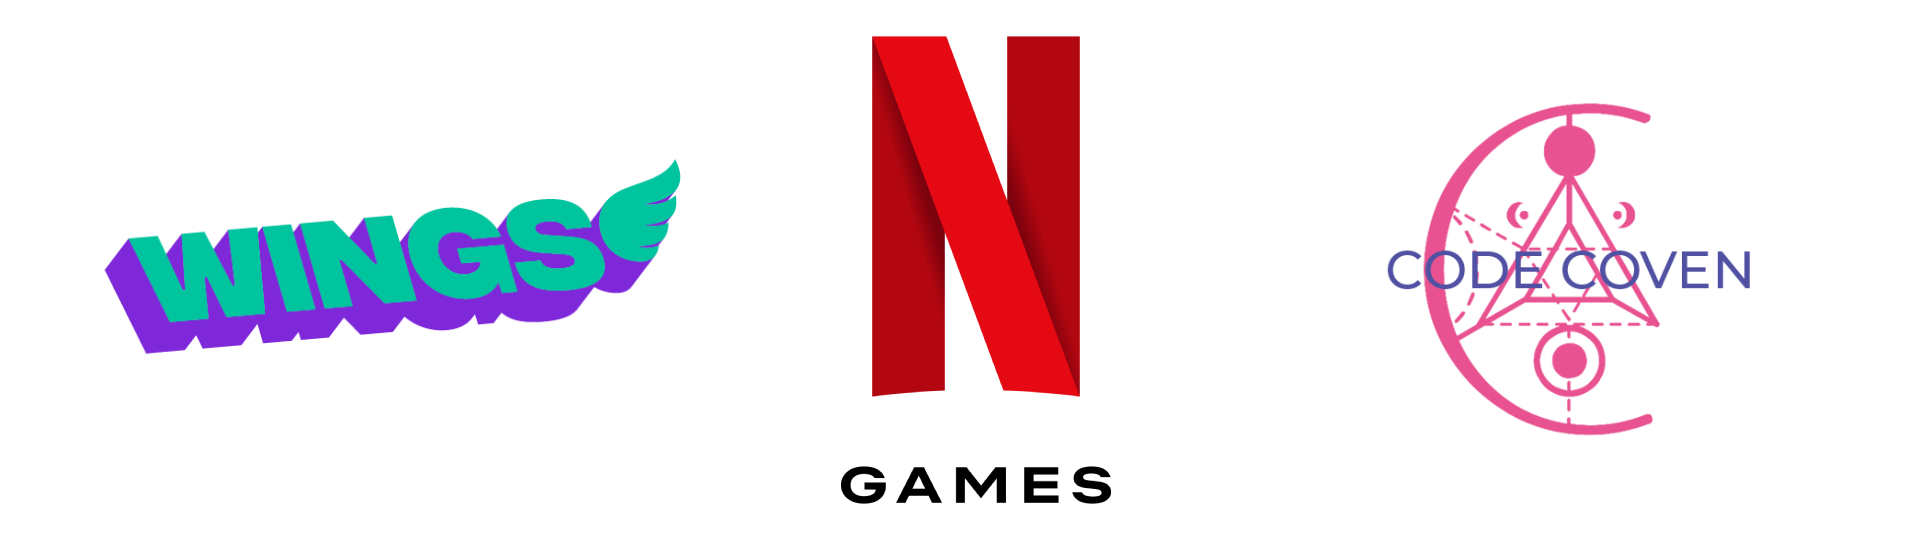 3 logos for wings, netflix, and code coven